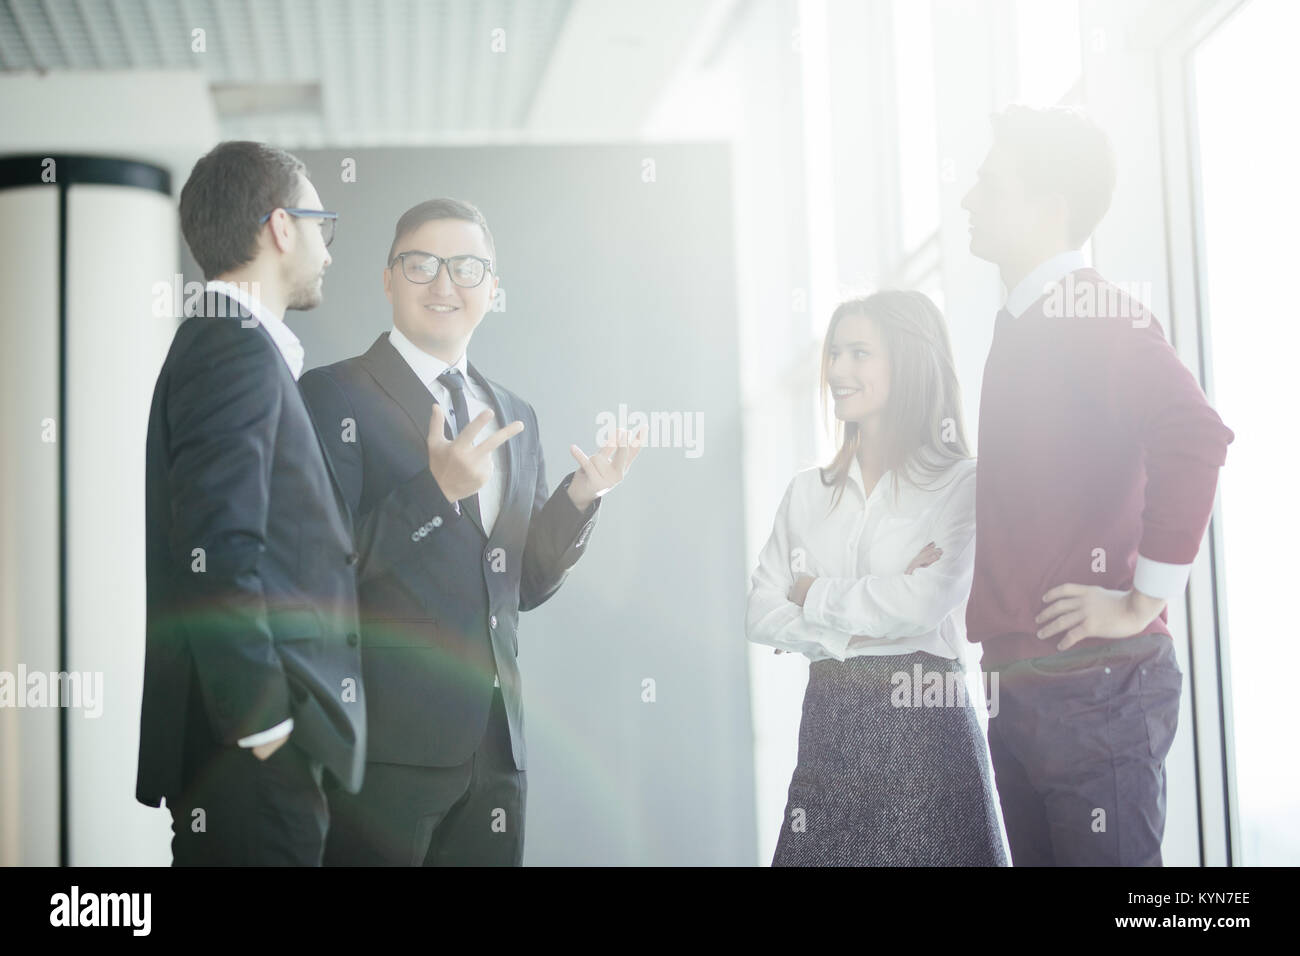 Business people discussing on informal meeting in office Stock Photo